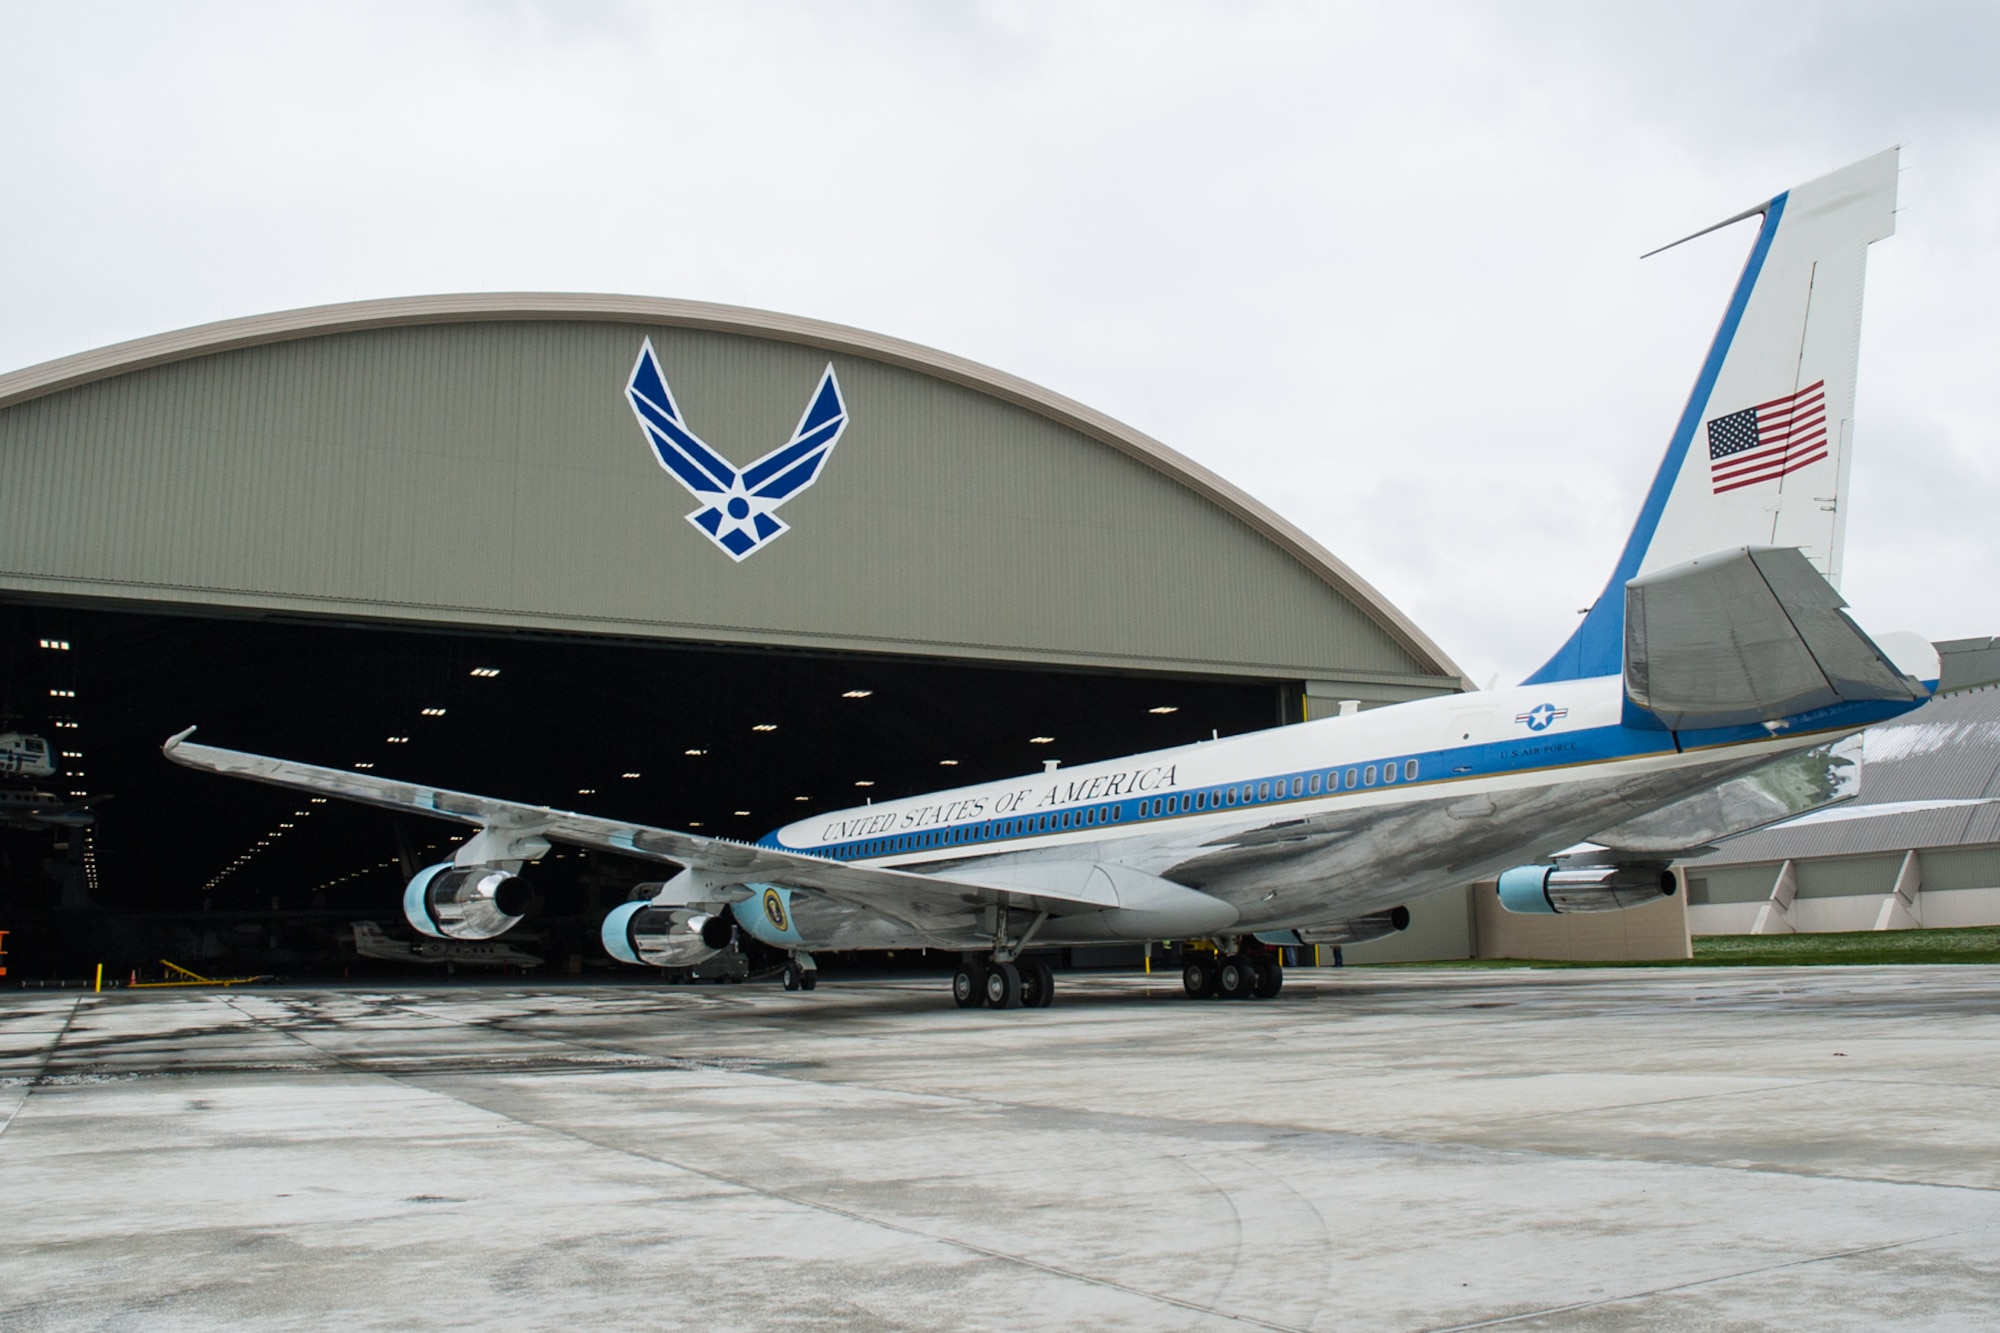 DAYTON, Ohio -- The VC-137C Air Force One (SAM 26000) being towed into the fourth building at the National Museum of the United States Air Force on April 9, 2016. (U.S. Air Force photo by Ken LaRock)